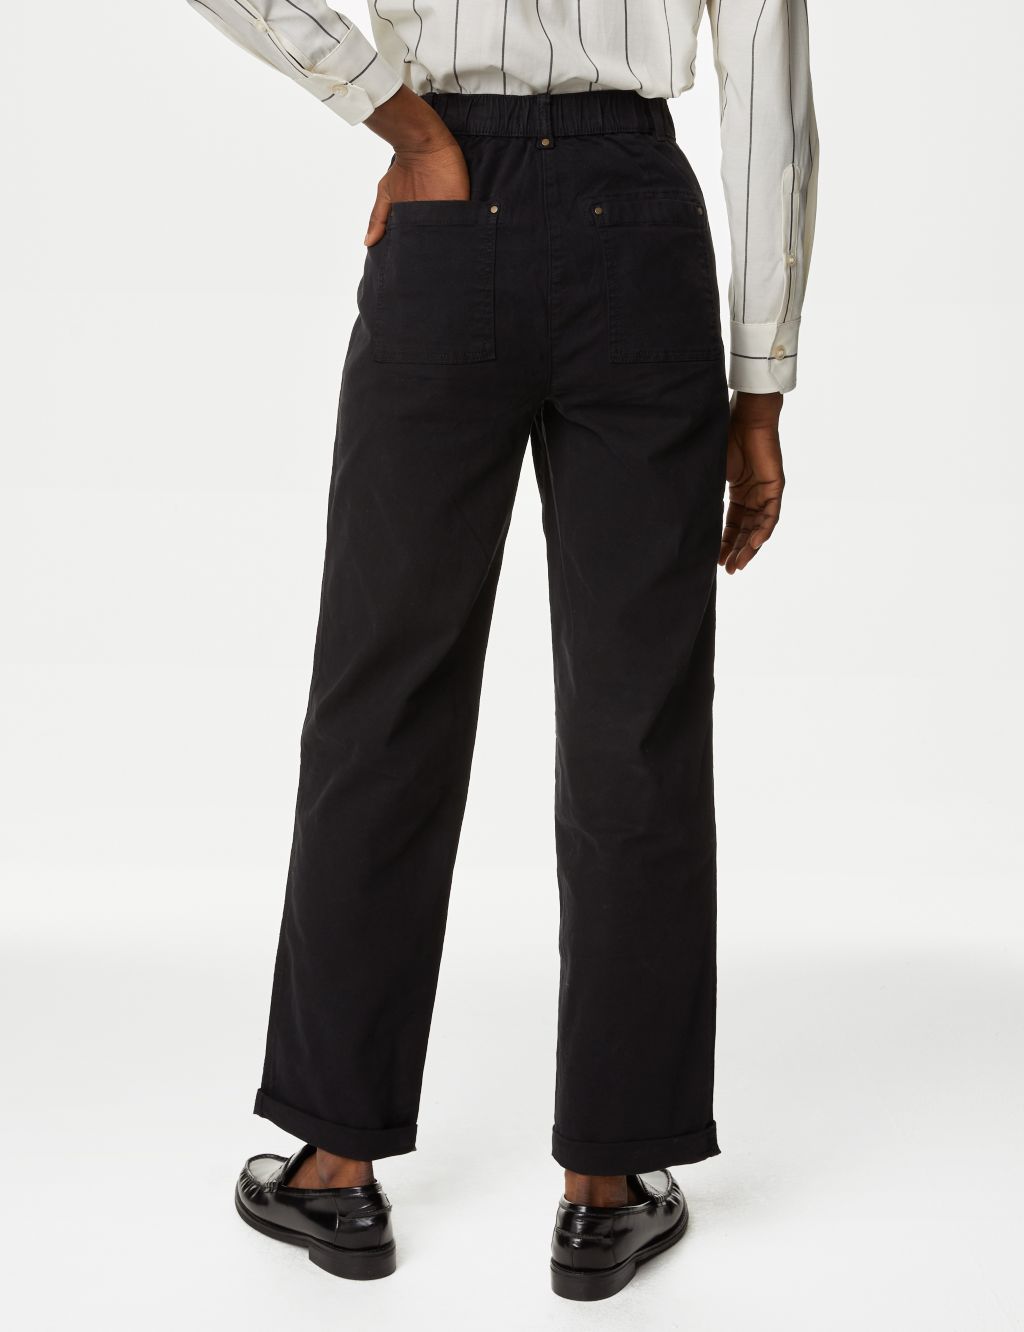 Page 2 - Women's Straight Leg Trousers | M&S